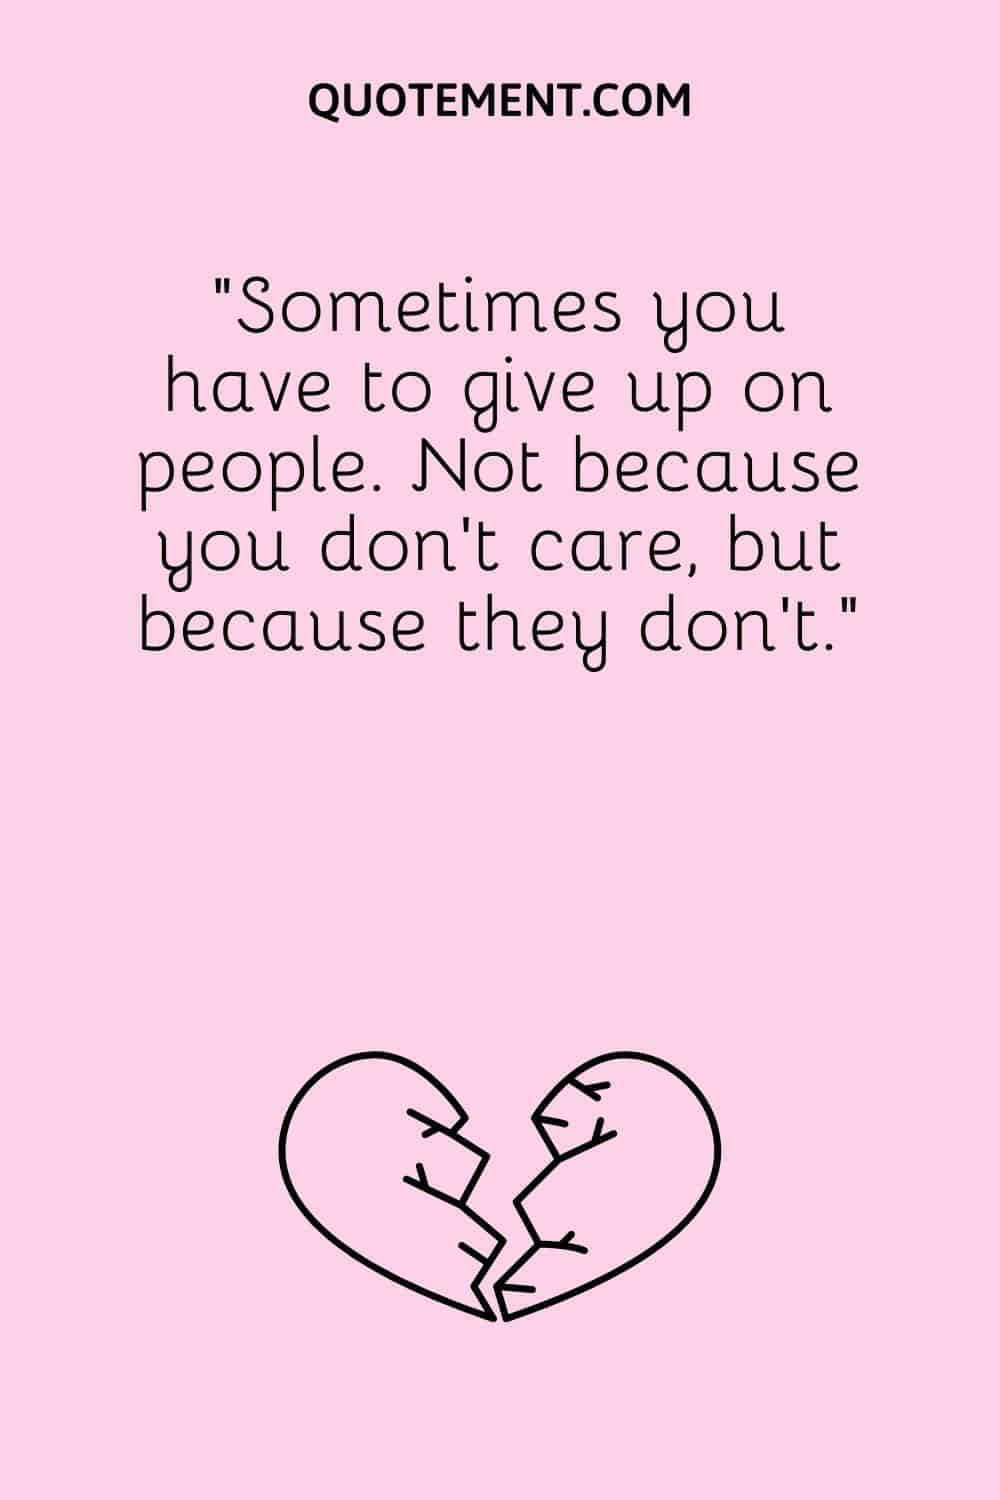 “Sometimes you have to give up on people. Not because you don’t care, but because they don’t.”